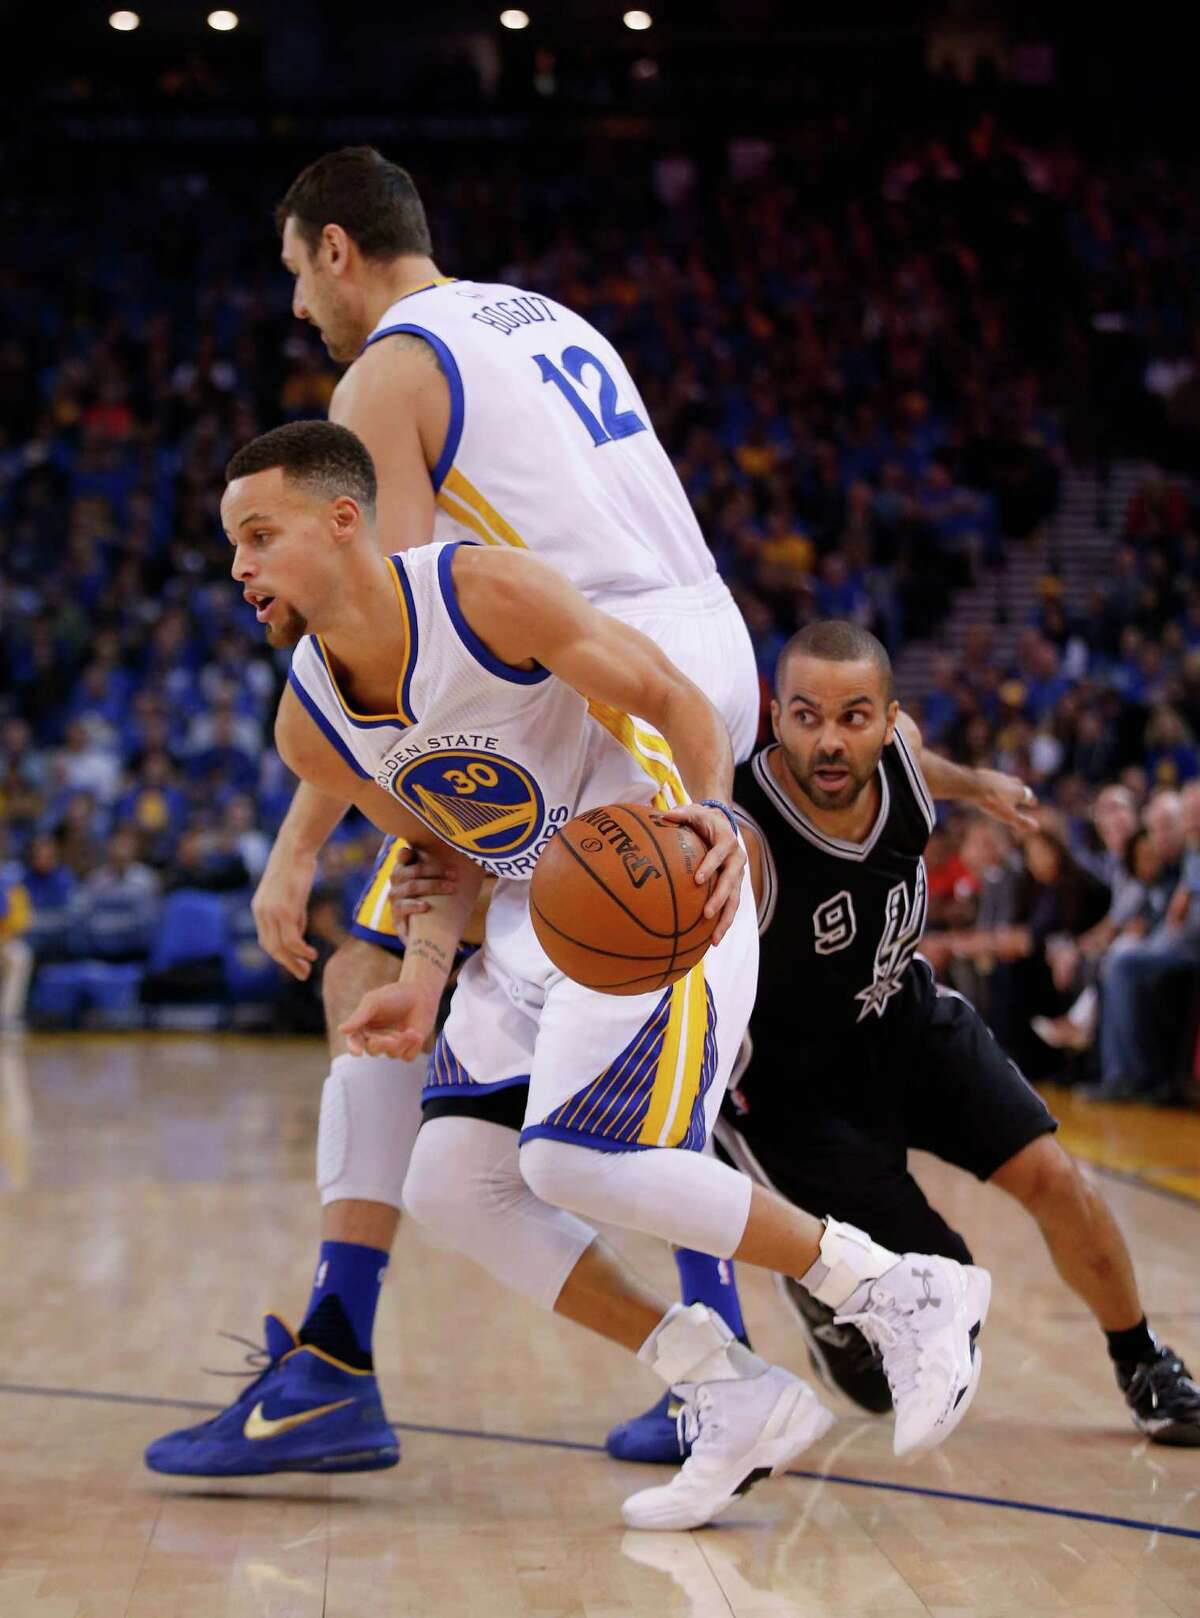 OAKLAND, CA - JANUARY 25: Stephen Curry #30 of the Golden State Warriors goes around a pick set by Andrew Bogut #12 while he is covered by Tony Parker #9 of the San Antonio Spurs at ORACLE Arena on January 25, 2016 in Oakland, California. NOTE TO USER: User expressly acknowledges and agrees that, by downloading and or using this photograph, User is consenting to the terms and conditions of the Getty Images License Agreement.